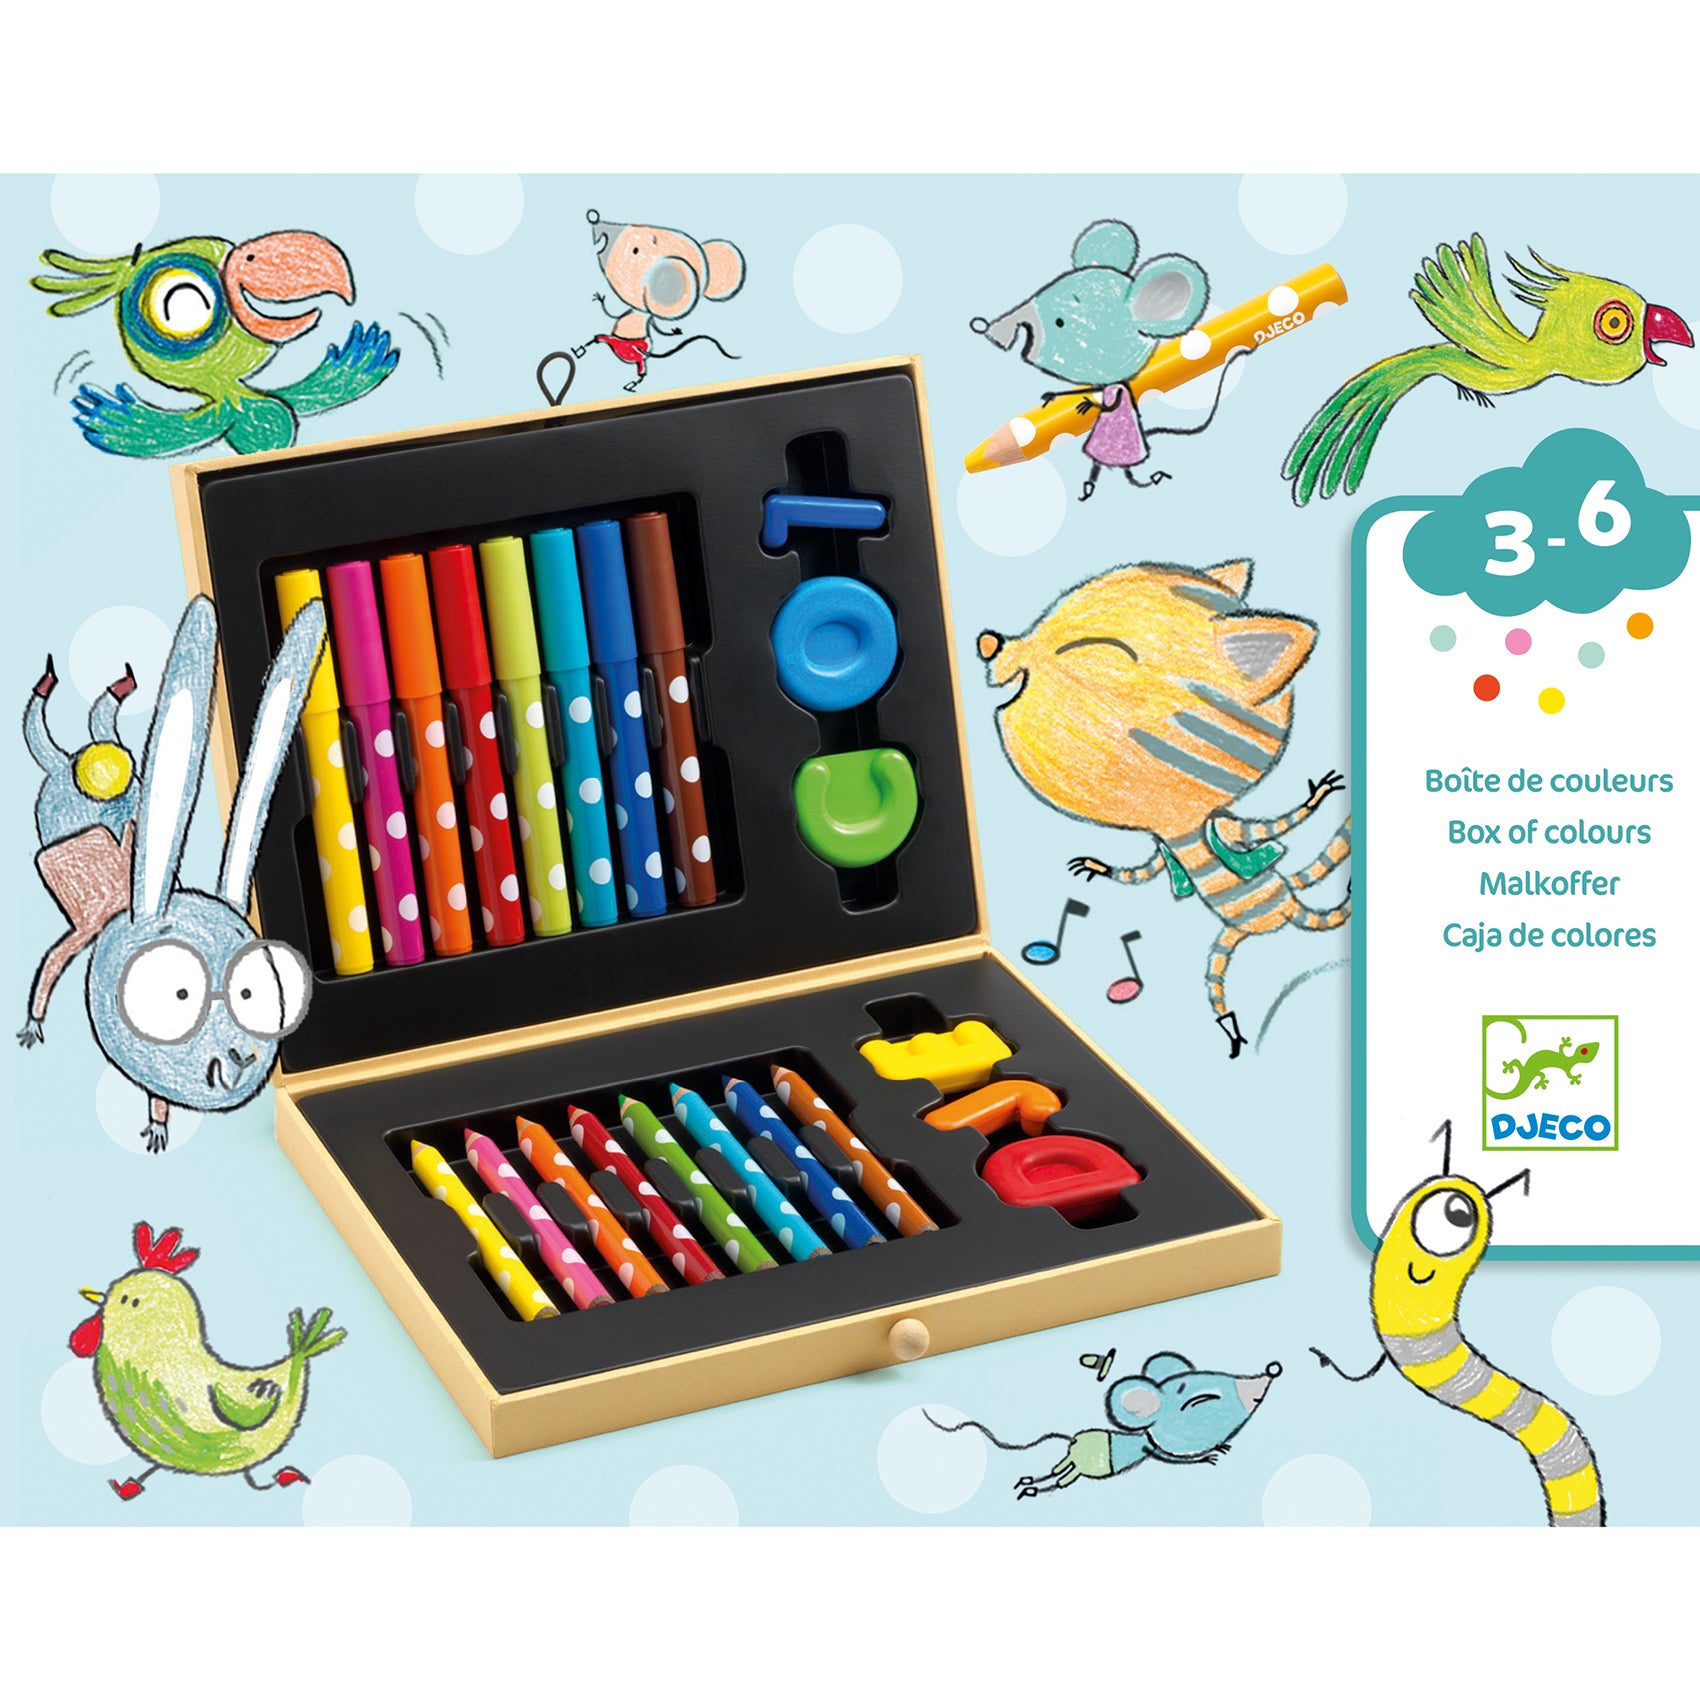 Djeco | Toddler Box of Colours